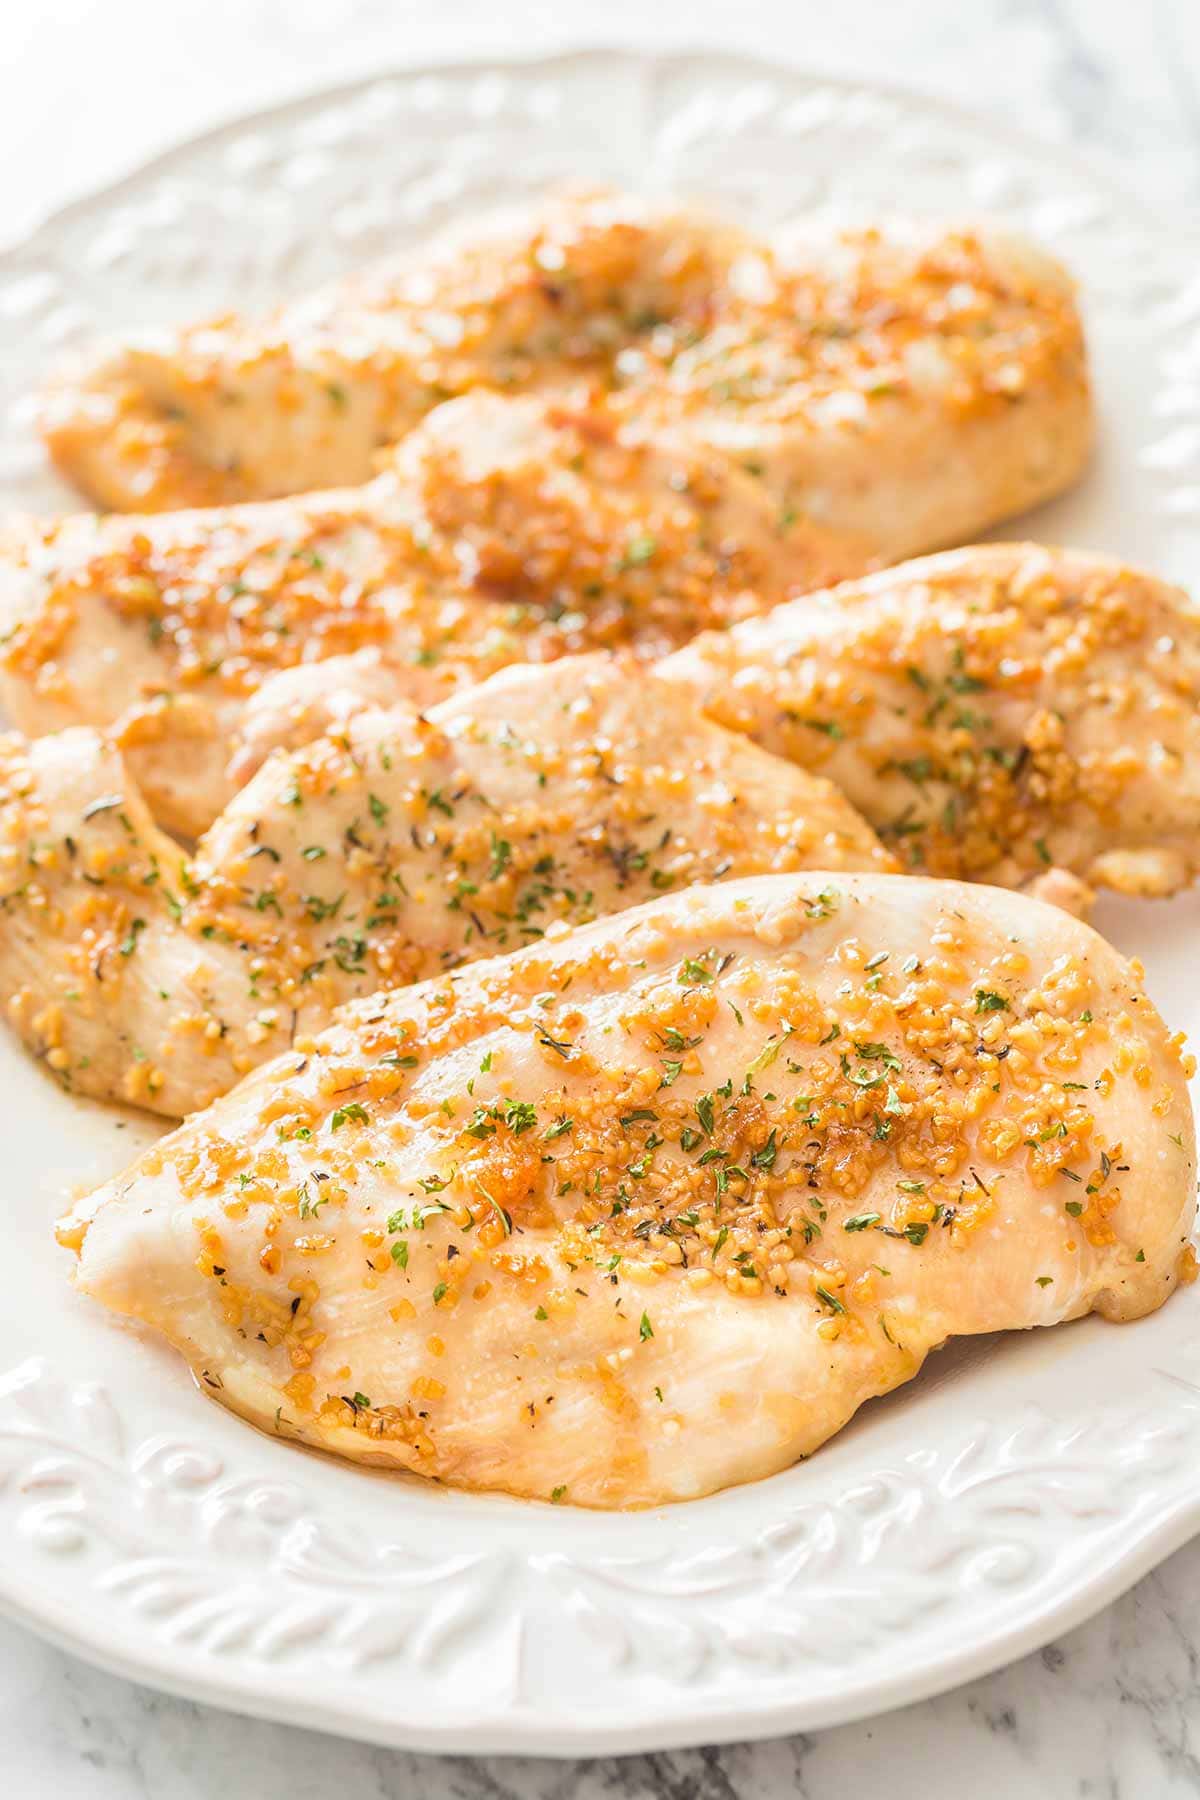 White platter with boneless skinless chicken breasts baked with garlic and brown sugar.